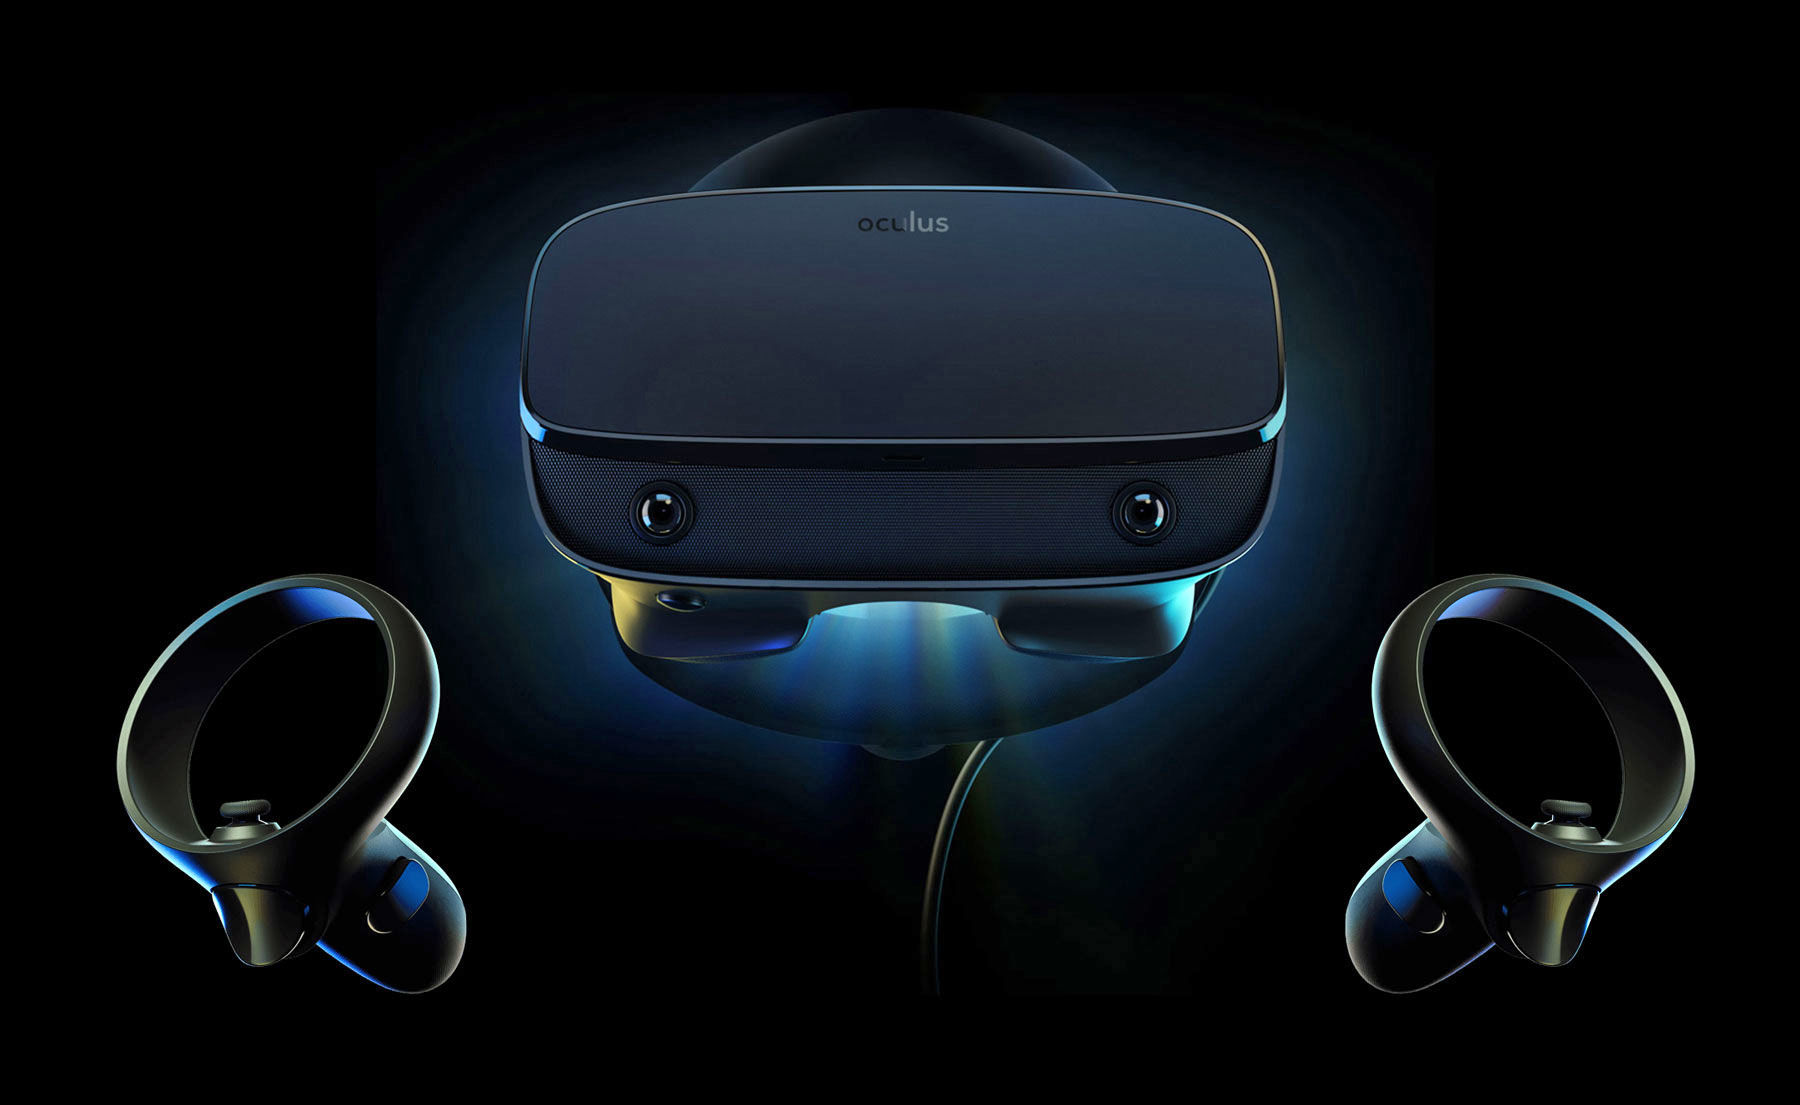 Oculus has unveiled a new virtual reality headset Rift S